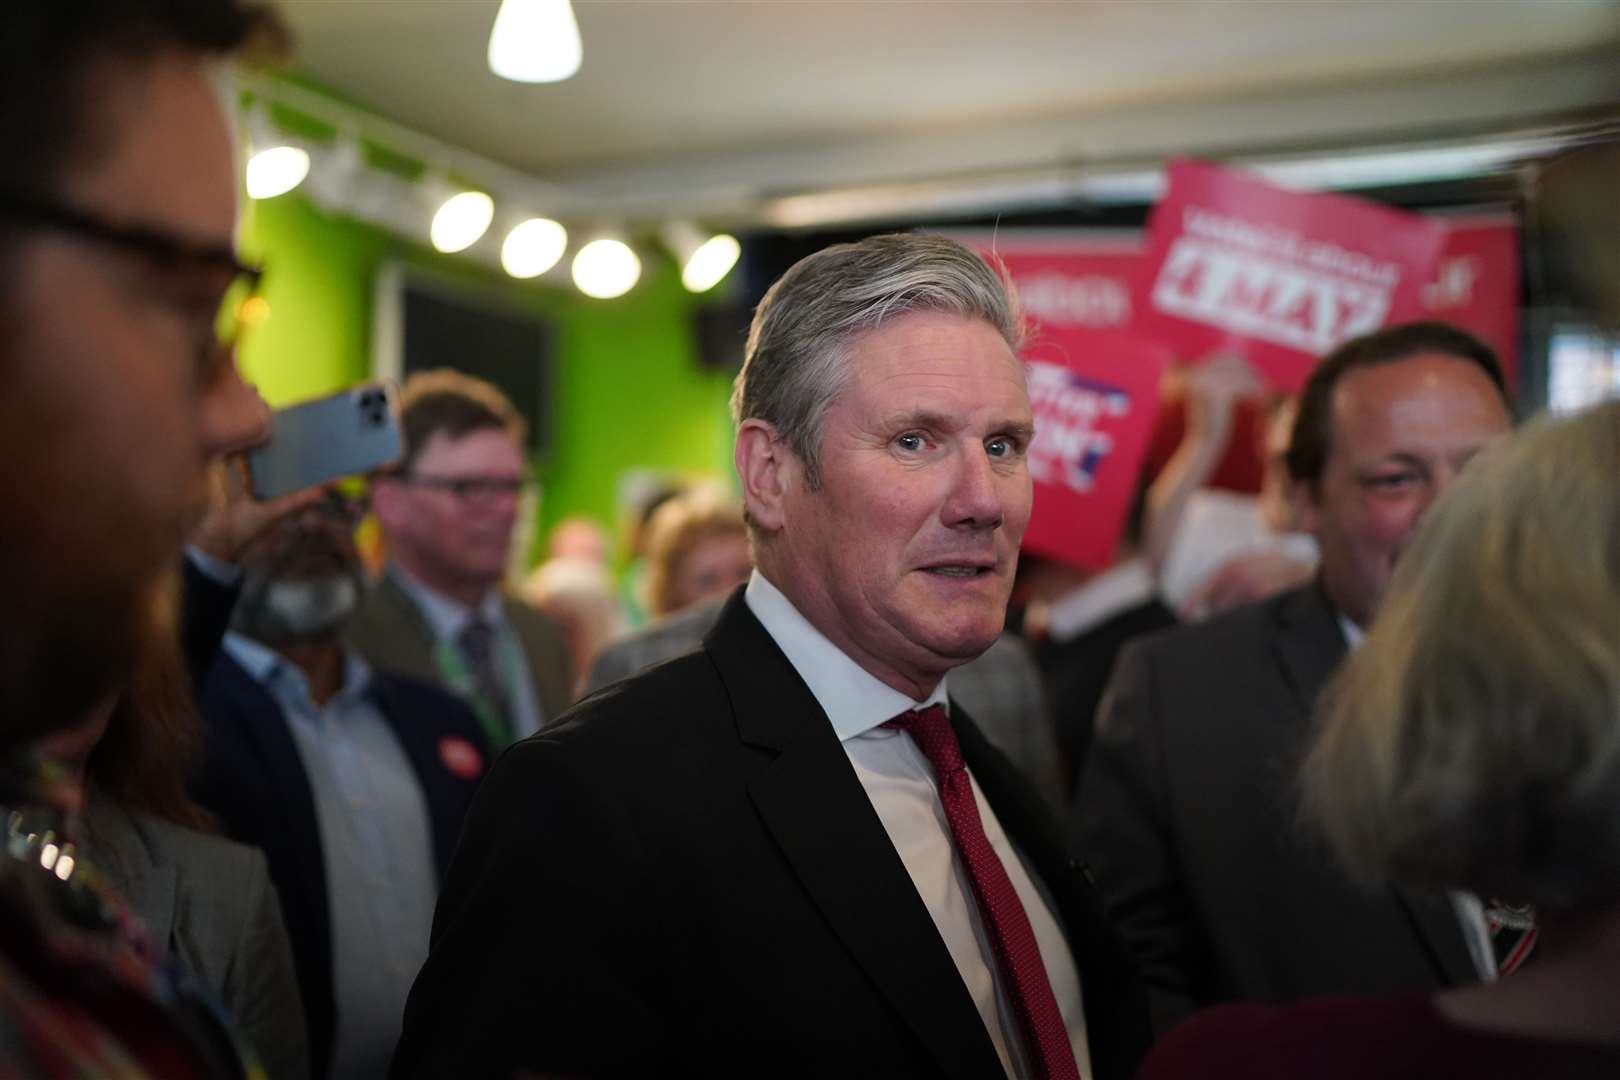 Labour leader Sir Keir Starmer during a visit to Gillingham, Kent, on the eve of local elections polling day to outline Labour’s plan to tackle the cost of living crisis. (Gareth Fuller, PA)